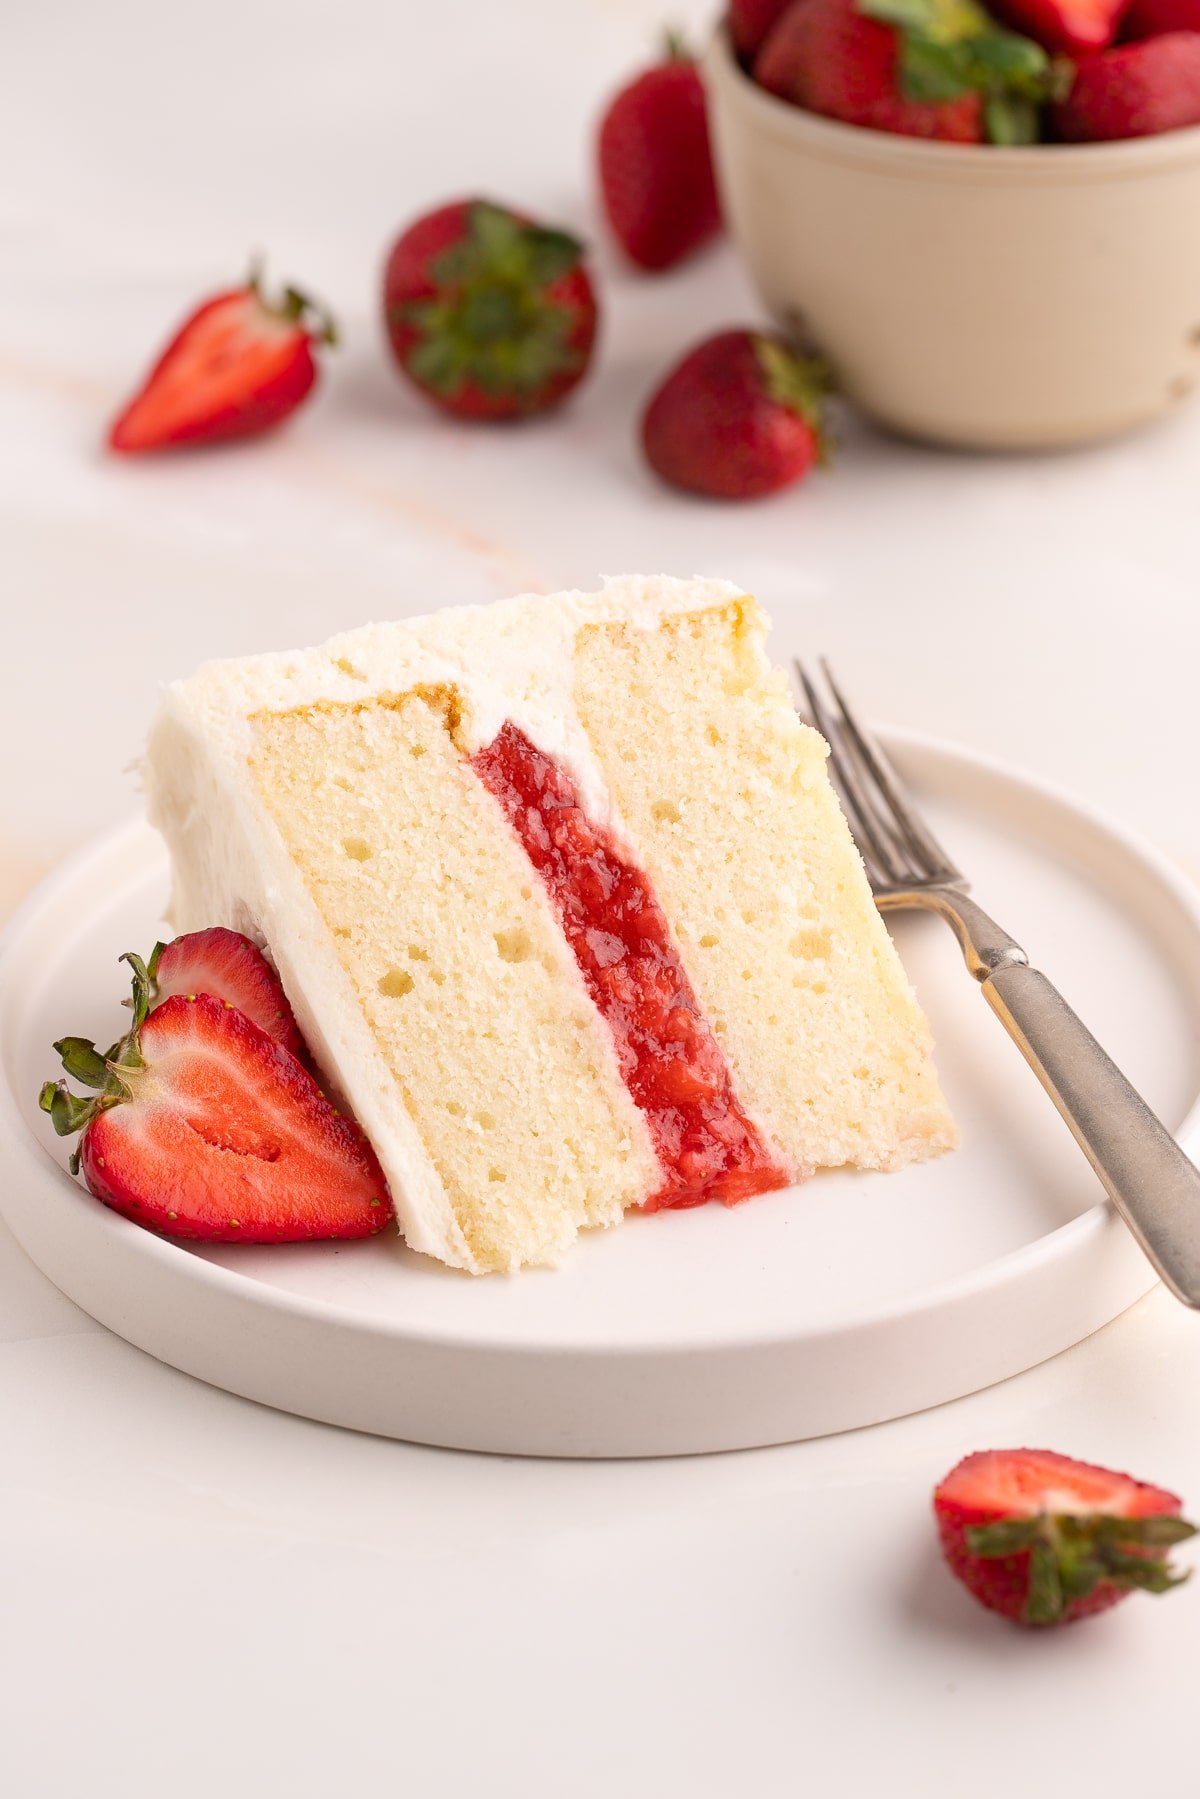 vanilla cake with strawberry filling on plate with forlk/